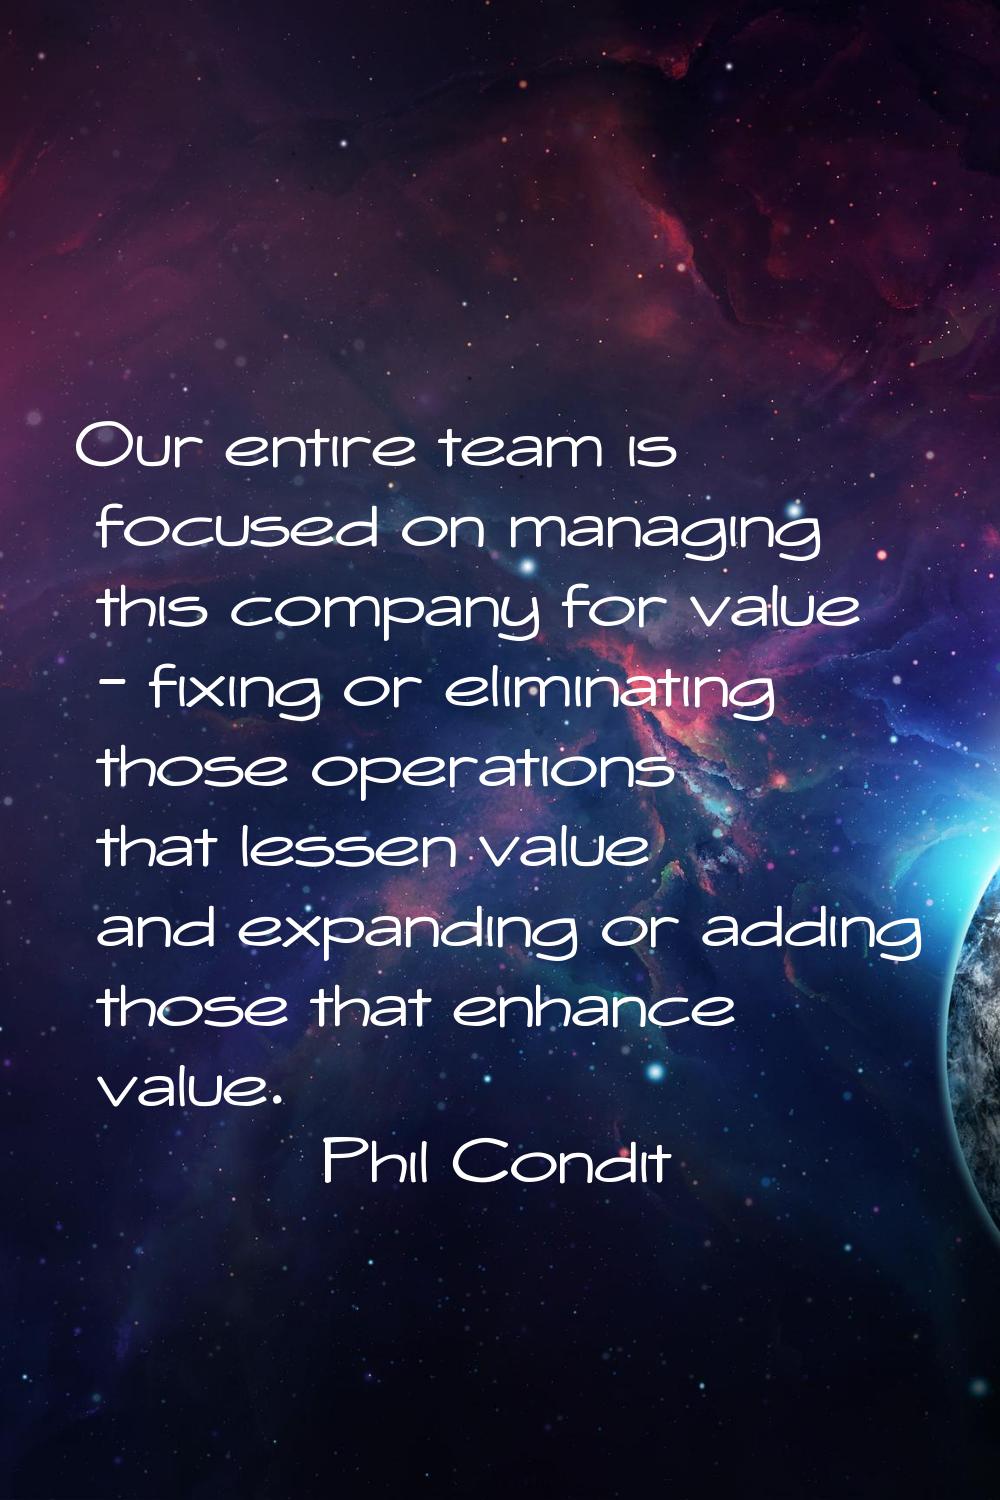 Our entire team is focused on managing this company for value - fixing or eliminating those operati